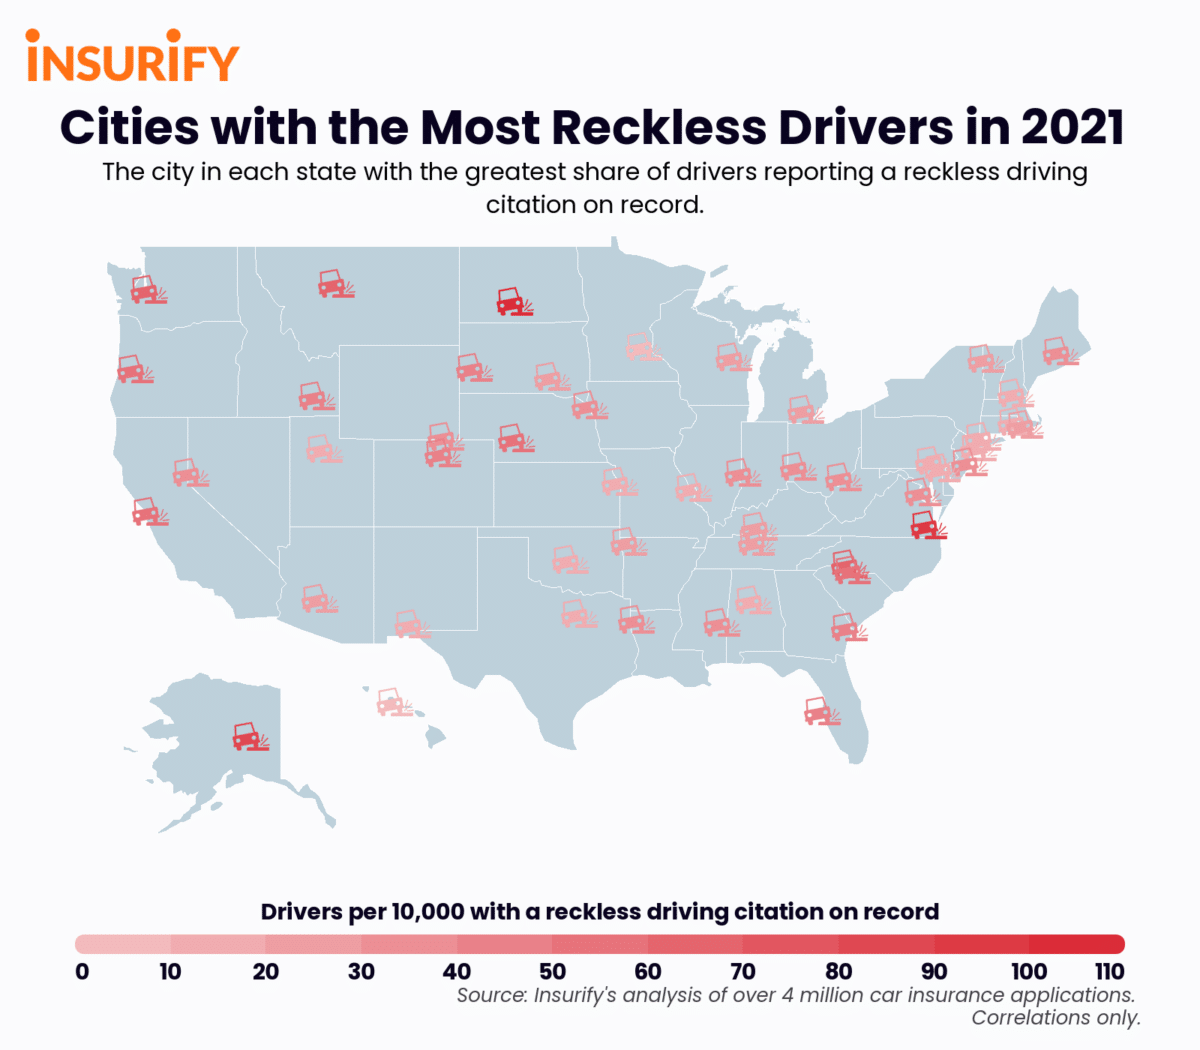 Map of the U.S. showing the city in each state with the highest share of drivers with a reckless driving citation on record